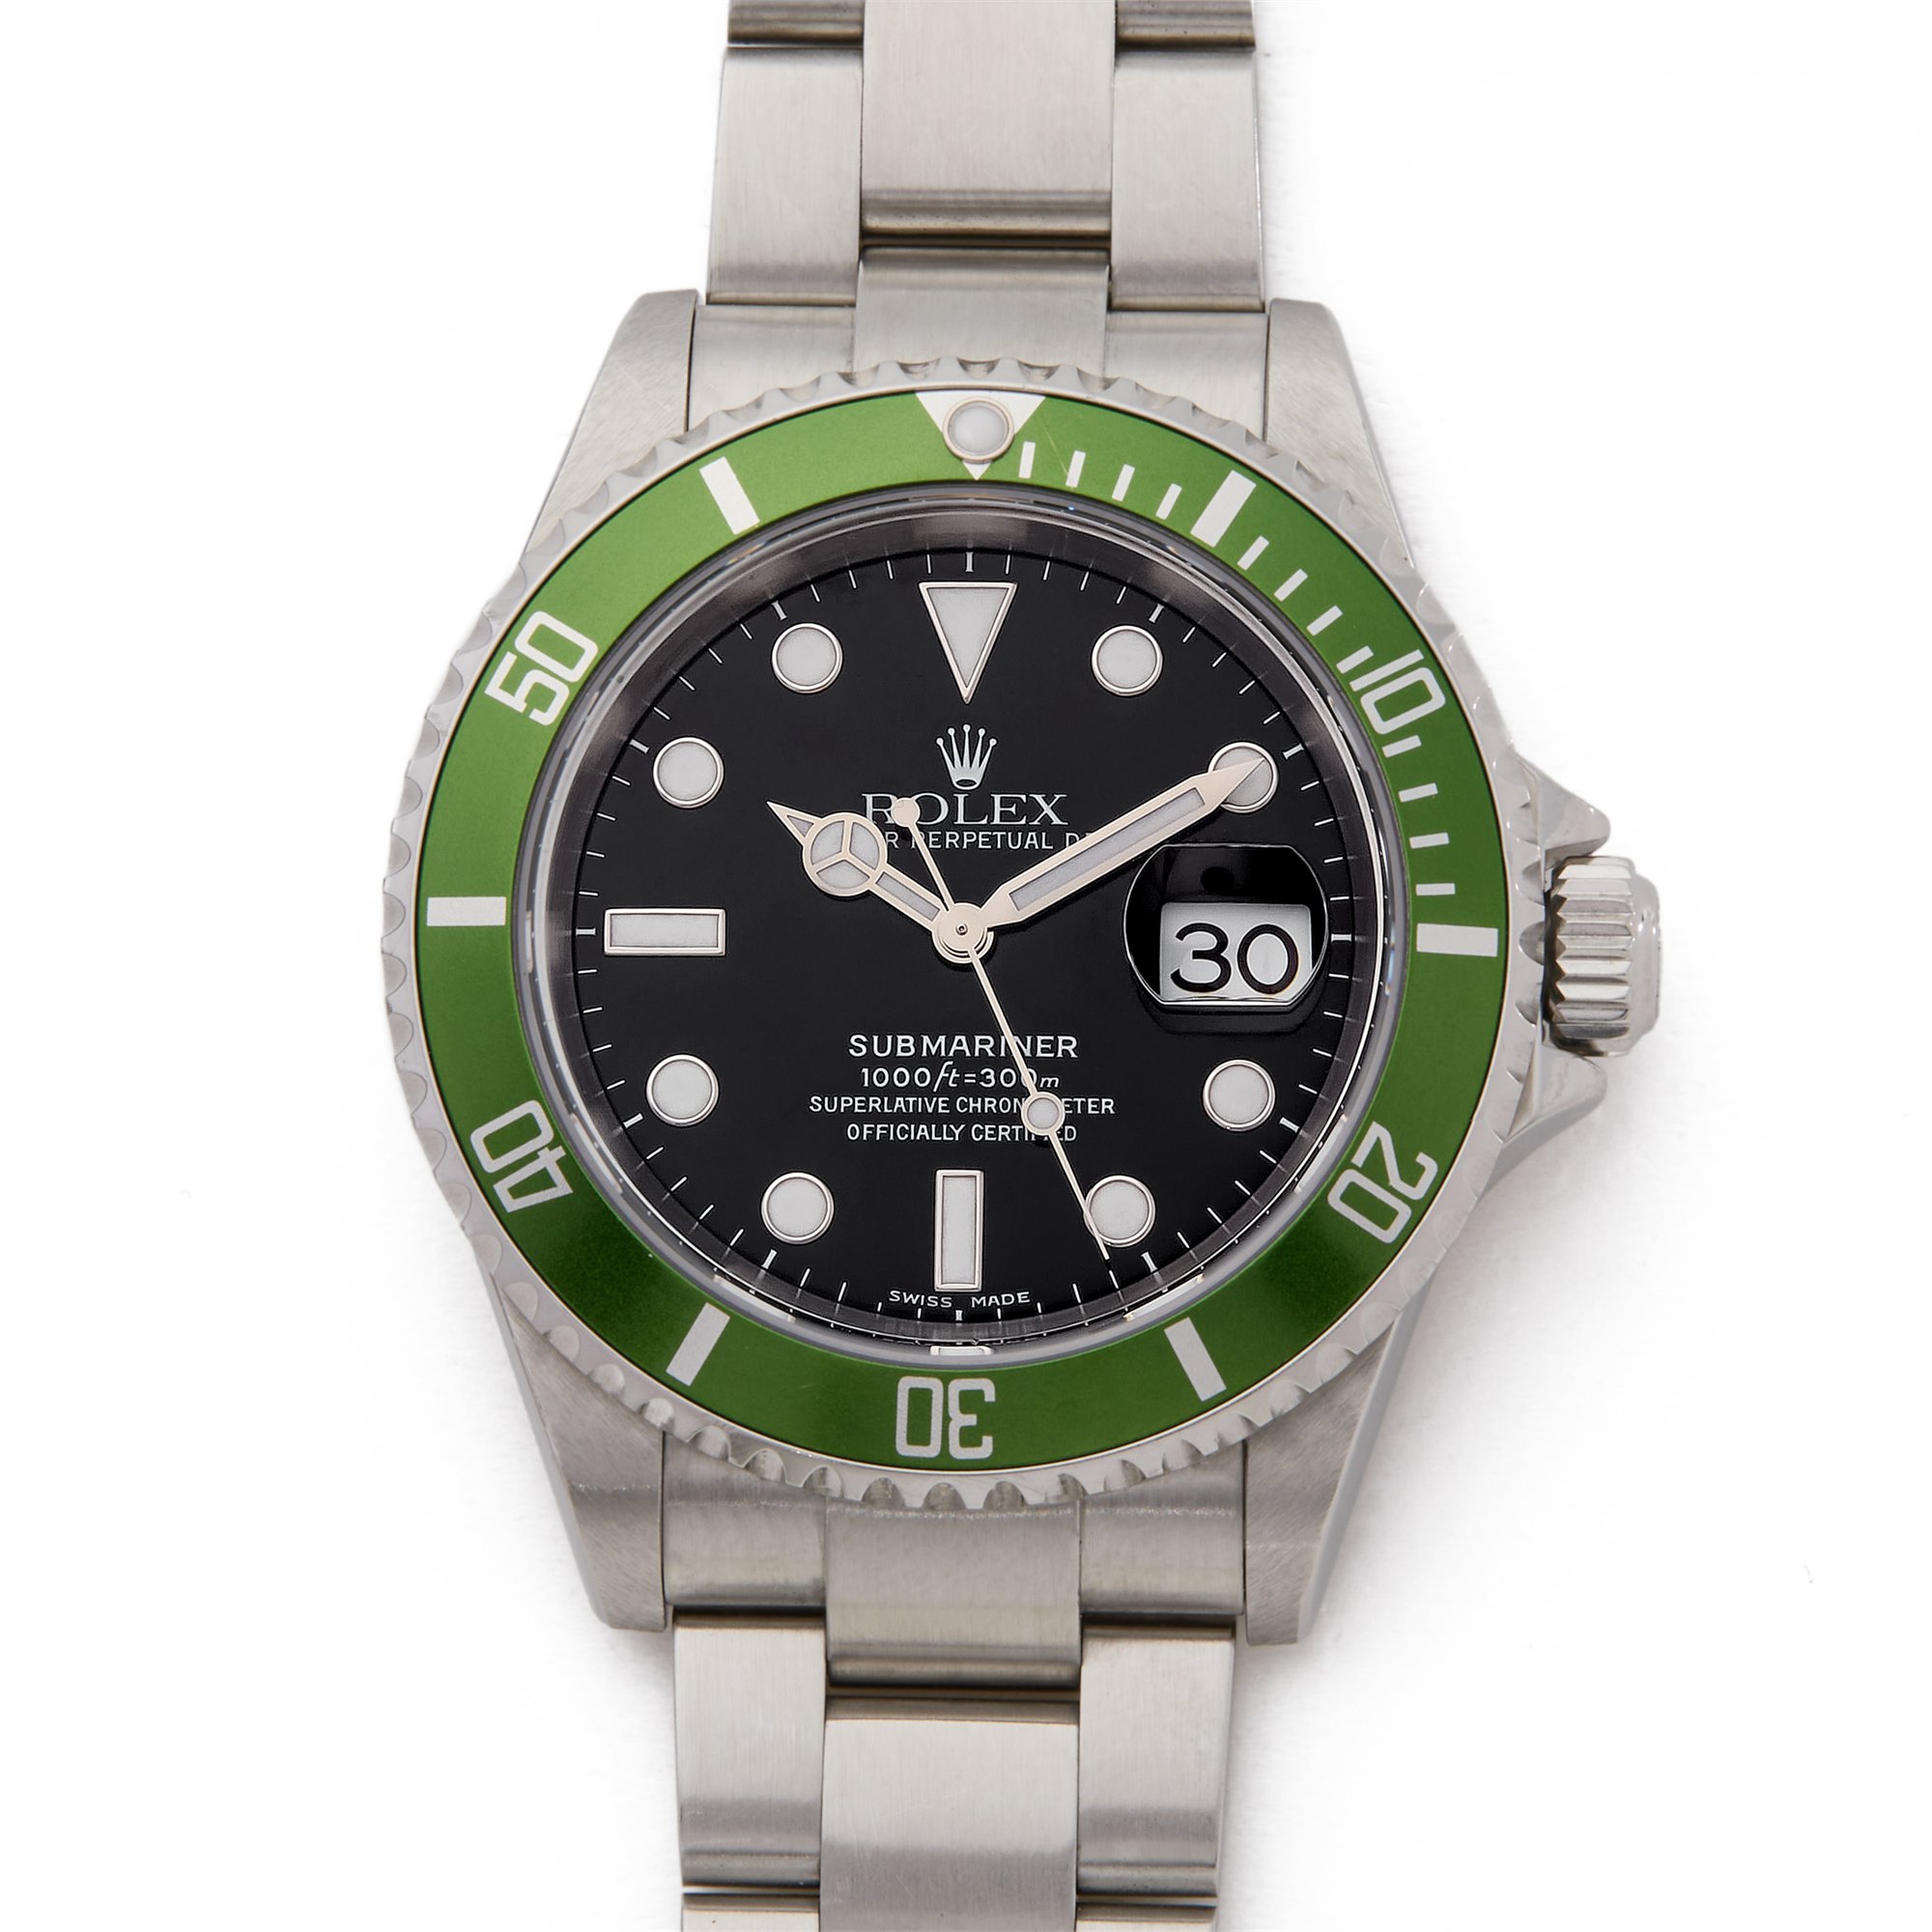 Rolex Submariner Date Flat 4 MK1 F Serial Unpolished Roestvrij Staal 16610LV